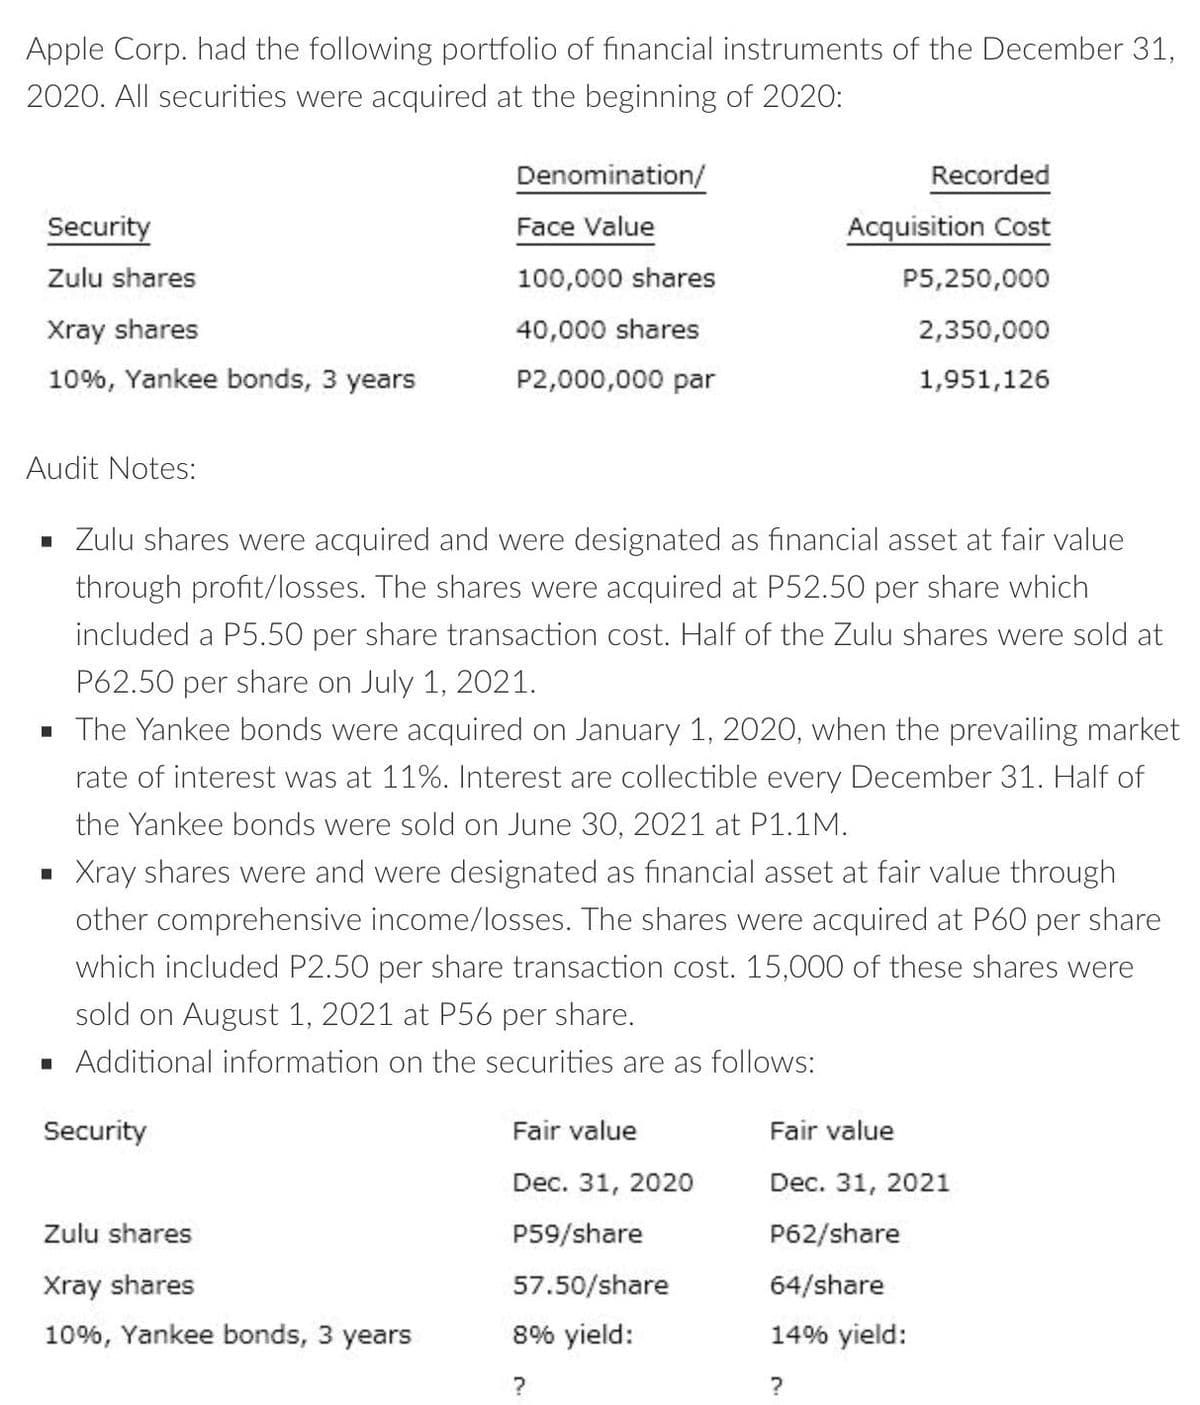 Apple Corp. had the following portfolio of financial instruments of the December 31,
2020. All securities were acquired at the beginning of 2020:
Denomination/
Recorded
Security
Face Value
Acquisition Cost
Zulu shares
100,000 shares
P5,250,000
Xray shares
40,000 shares
2,350,000
10%, Yankee bonds, 3 years
P2,000,000 par
1,951,126
Audit Notes:
· Zulu shares were acquired and were designated as financial asset at fair value
through profit/losses. The shares were acquired at P52.50 per share which
included a P5.50 per share transaction cost. Half of the Zulu shares were sold at
P62.50 per share on July 1, 2021.
· The Yankee bonds were acquired on January 1, 2020, when the prevailing market
rate of interest was at 11%. Interest are collectible every December 31. Half of
the Yankee bonds were sold on June 30, 2021 at P1.1M.
• Xray shares were and were designated as financial asset at fair value through
other comprehensive income/losses. The shares were acquired at P60 per share
which included P2.50 per share transaction cost. 15,000 of these shares were
sold on August 1, 2021 at P56 per share.
· Additional information on the securities are as follows:
Security
Fair value
Fair value
Dec. 31, 2020
Dec. 31, 2021
Zulu shares
P59/share
P62/share
Xray shares
57.50/share
64/share
10%, Yankee bonds, 3 years
8% yield:
14% yield:
